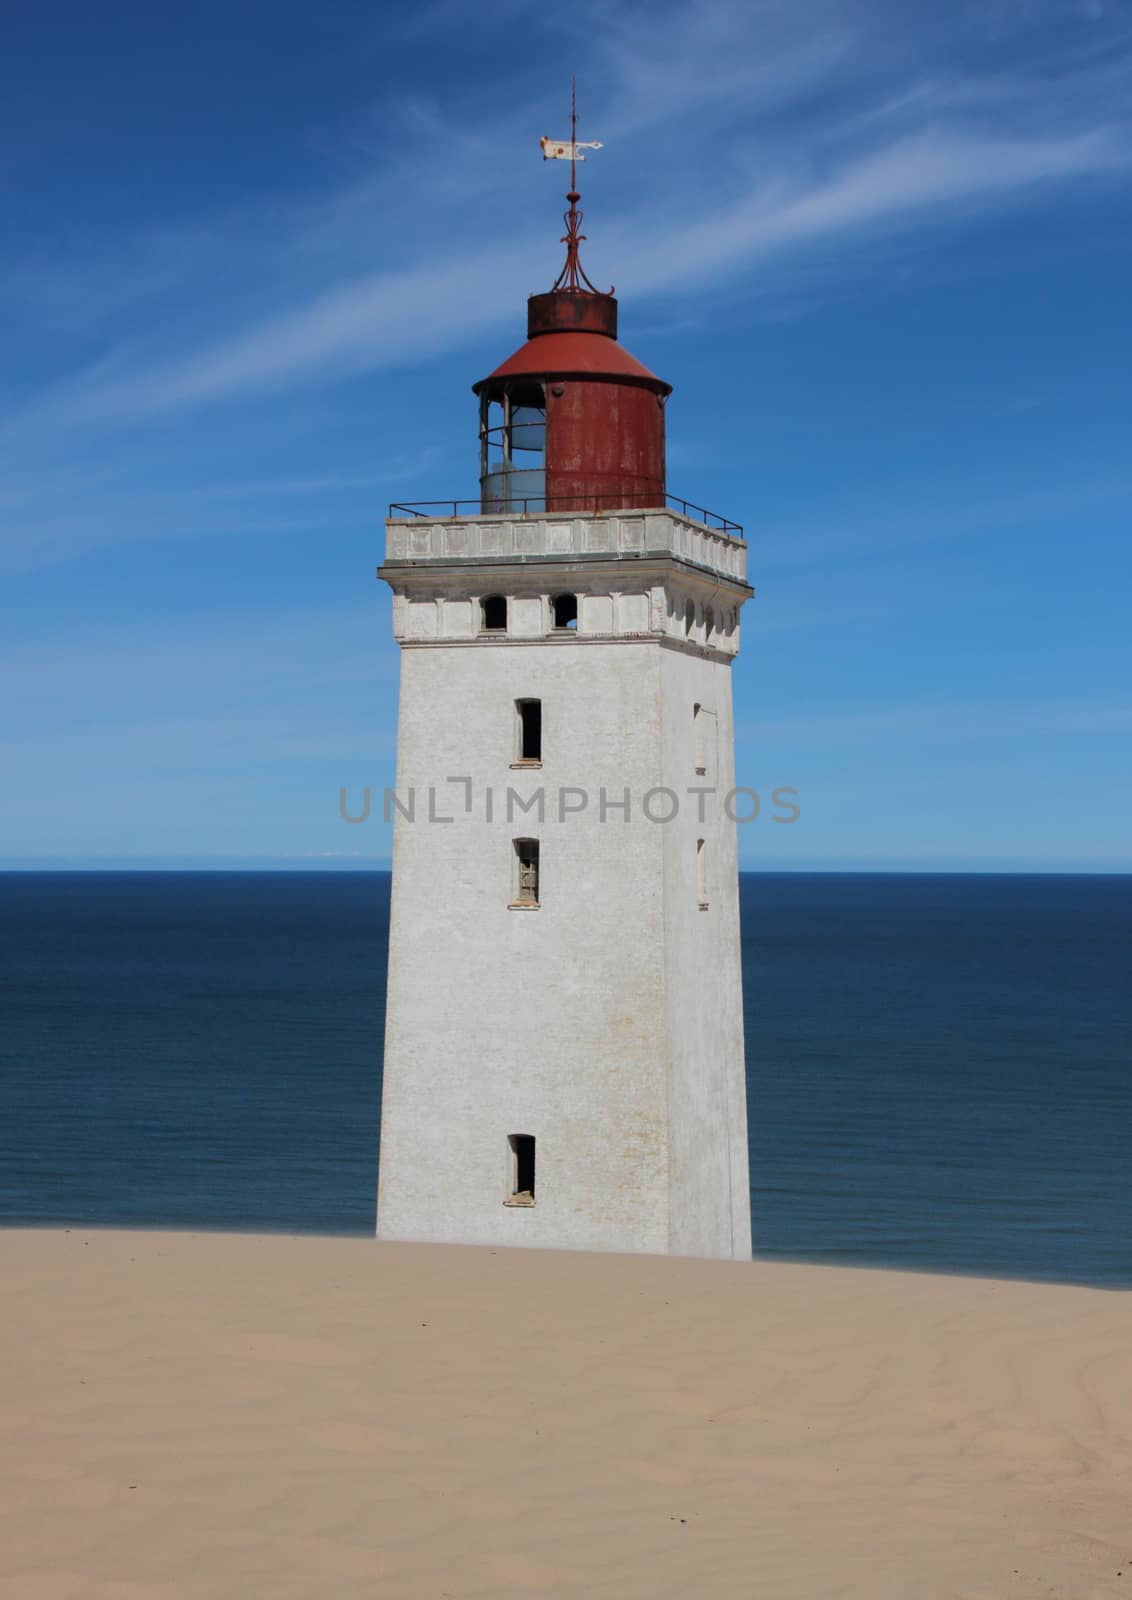 Old Lighthouse with Sand Dune and Blue Ocean in Horizon